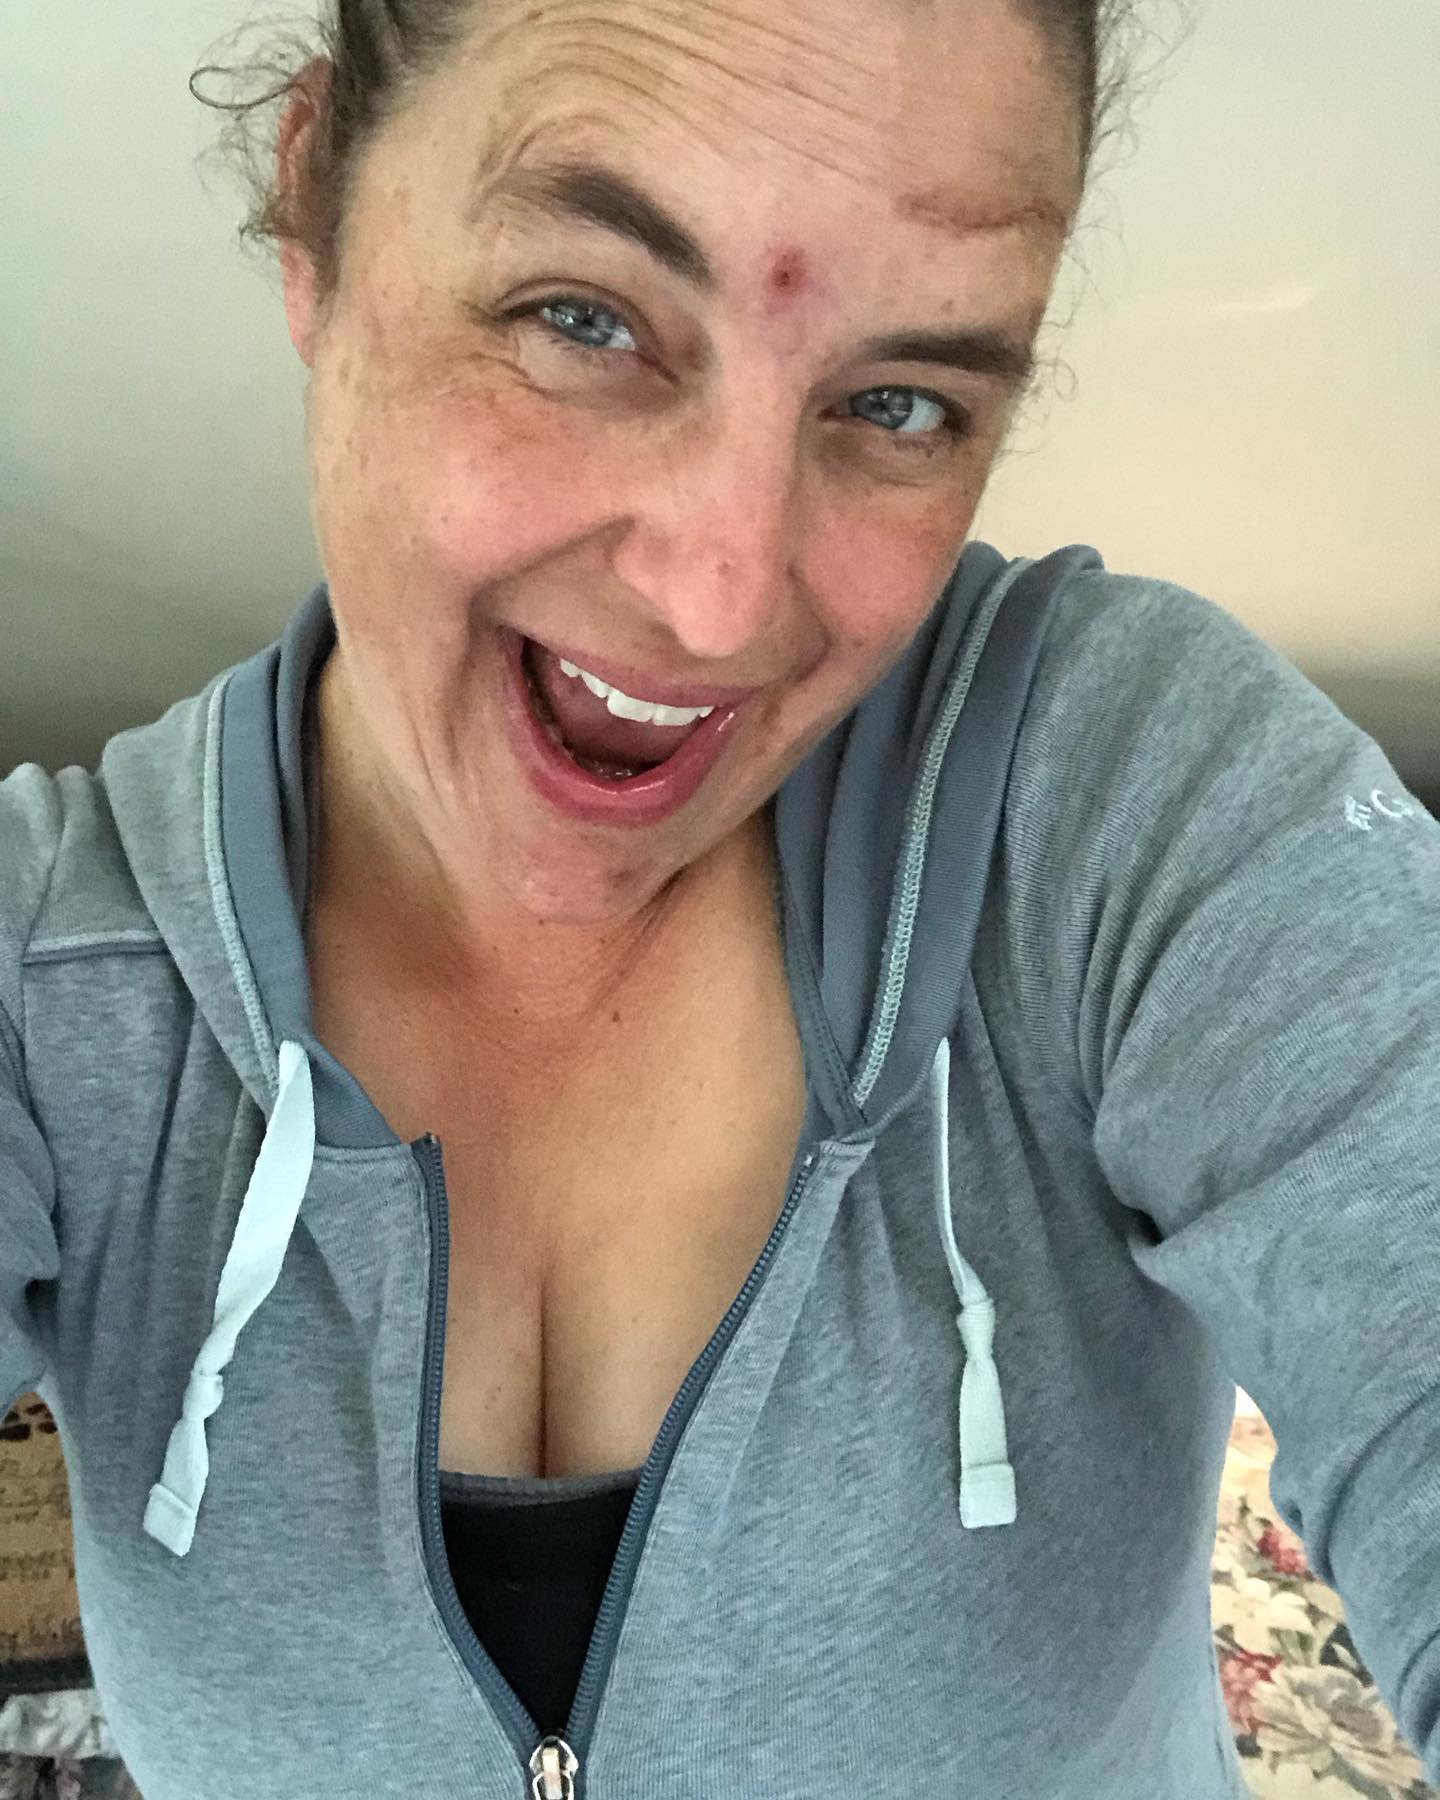 Here&rsquo;s me, my zit-o-riffic self, taking myself not so seriously. 😁 

I took a few starter photos since I was finally a pusher enough to get myself out the door for a run/walk this morn, followed by a podcast sesh and more. But the last thing w